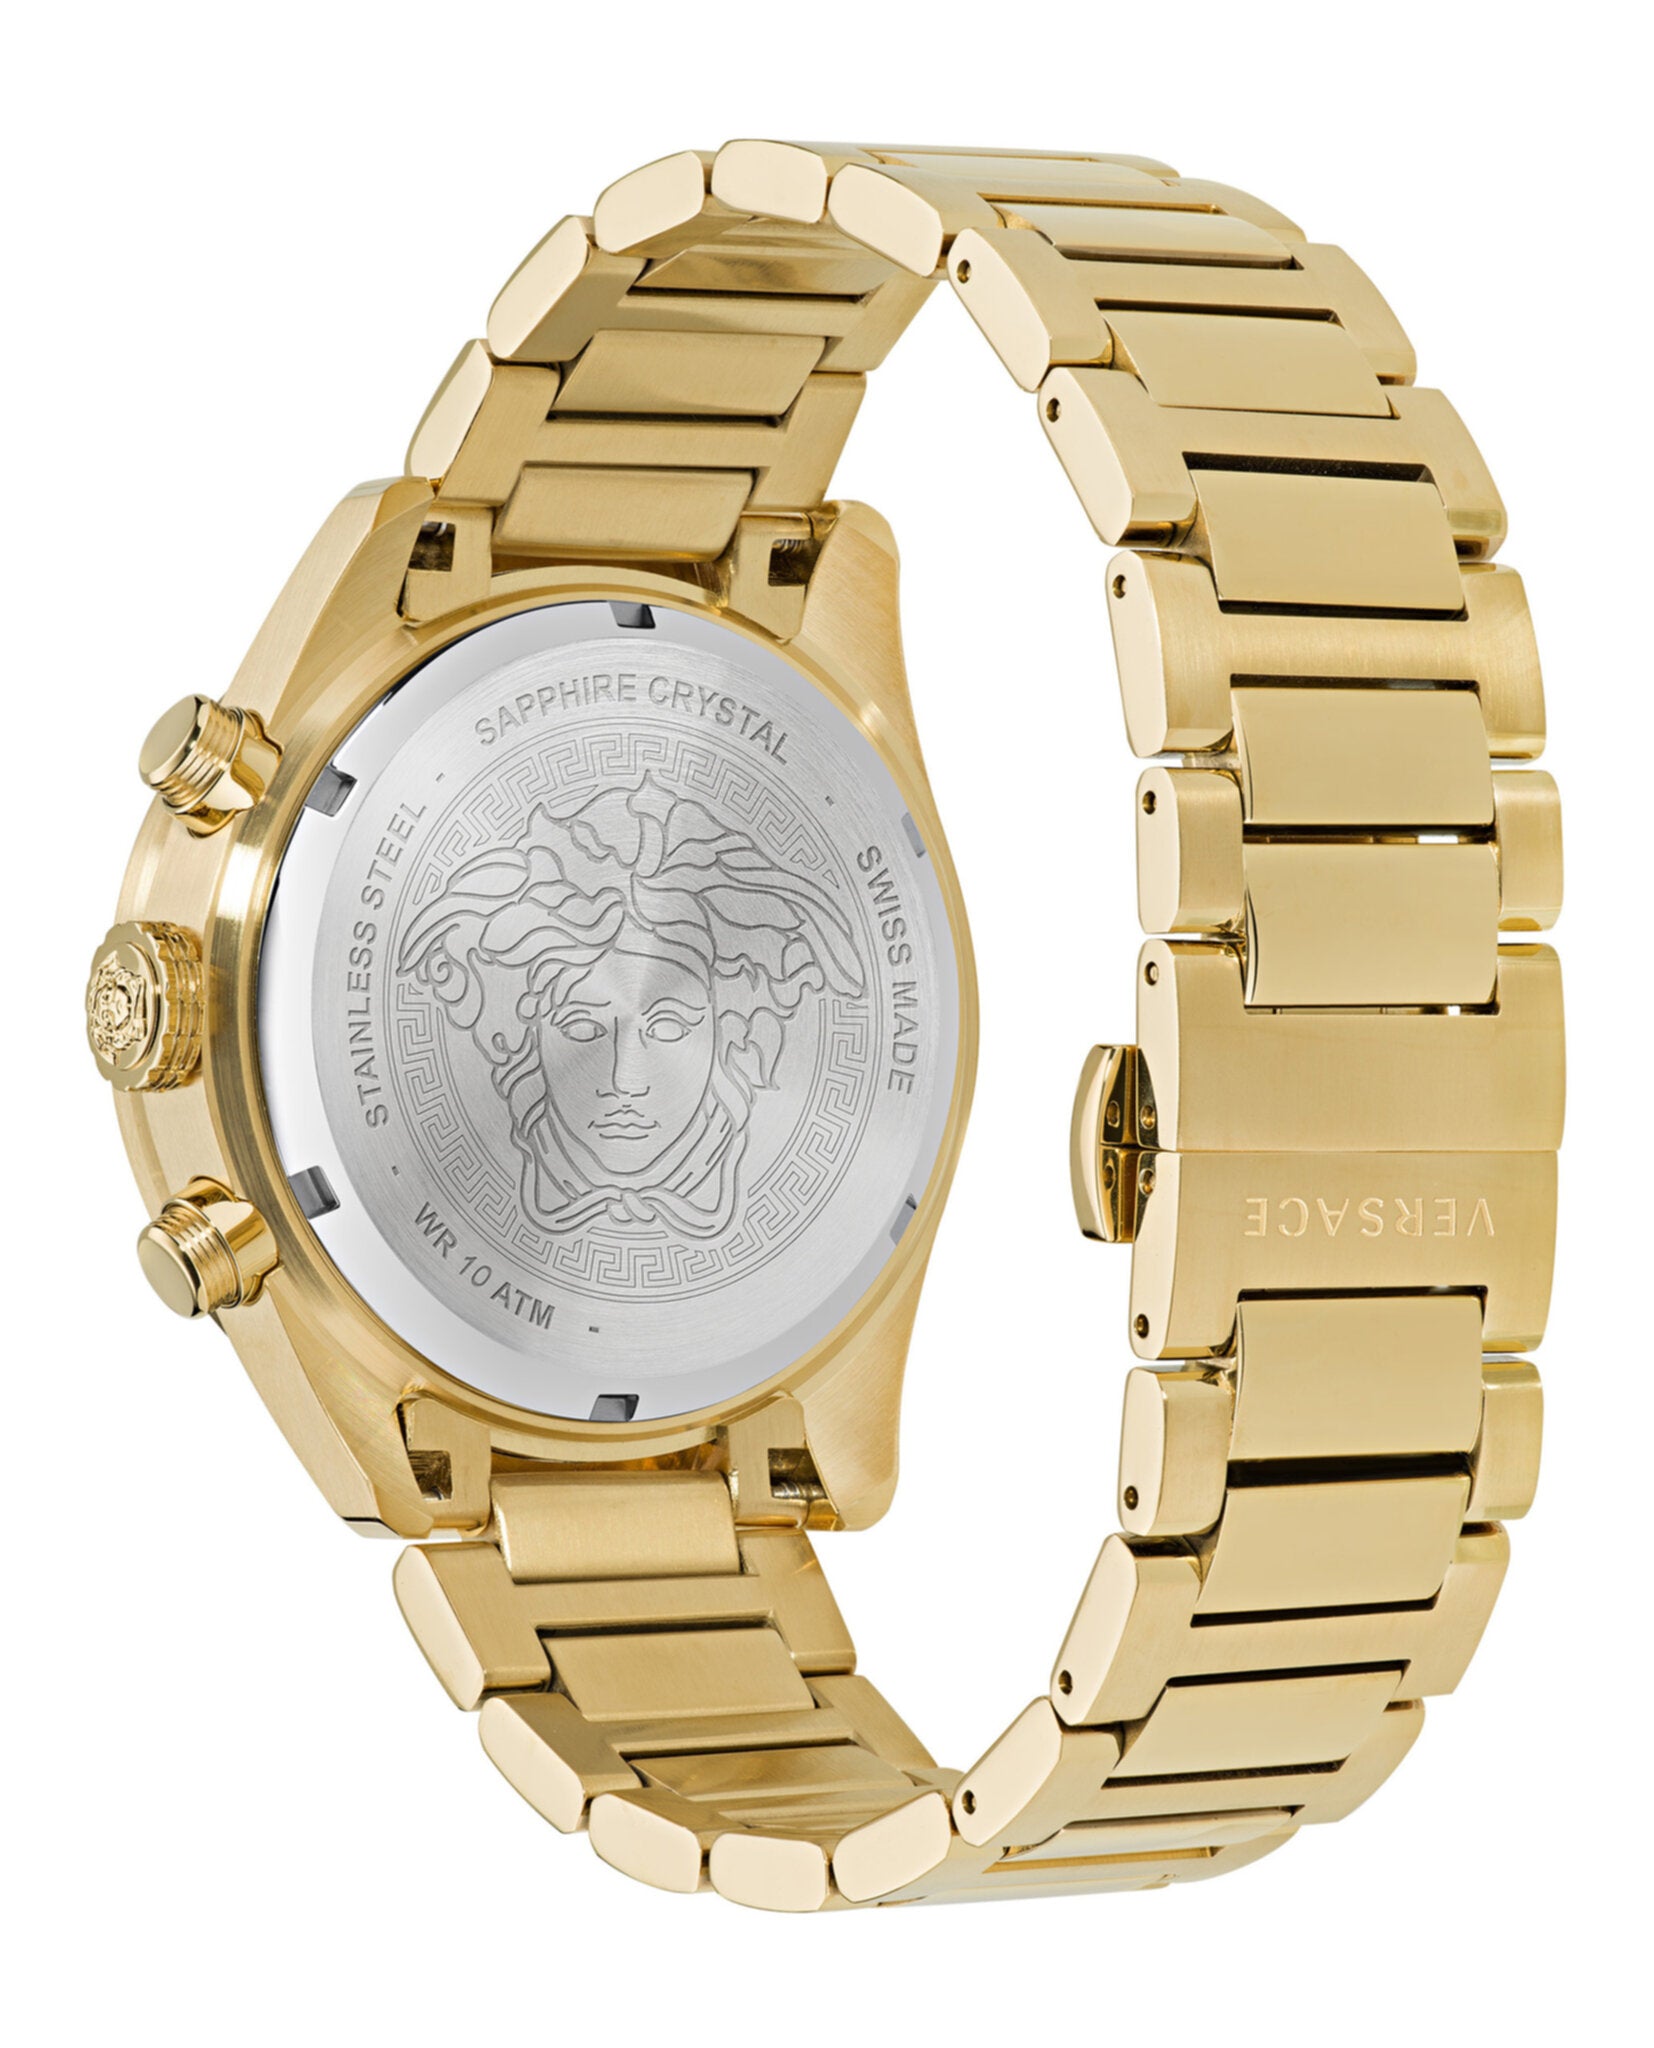 Madaluxe – Dome Versace Time Watches Time Greca | MadaLuxe Mens